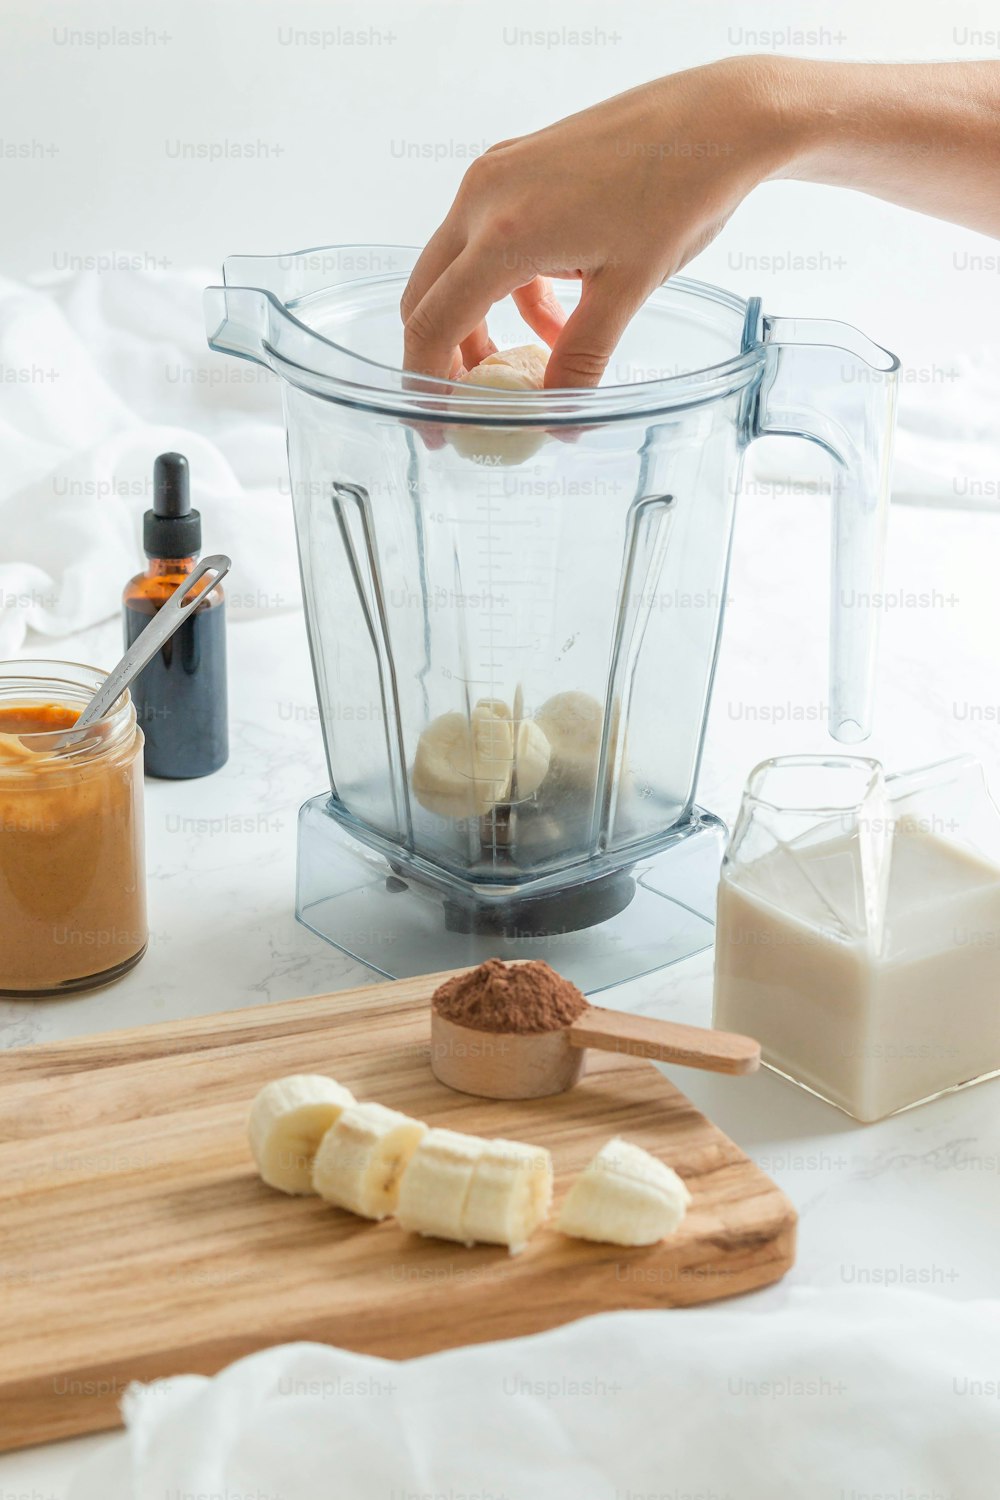 a person is making a banana smoothie in a blender